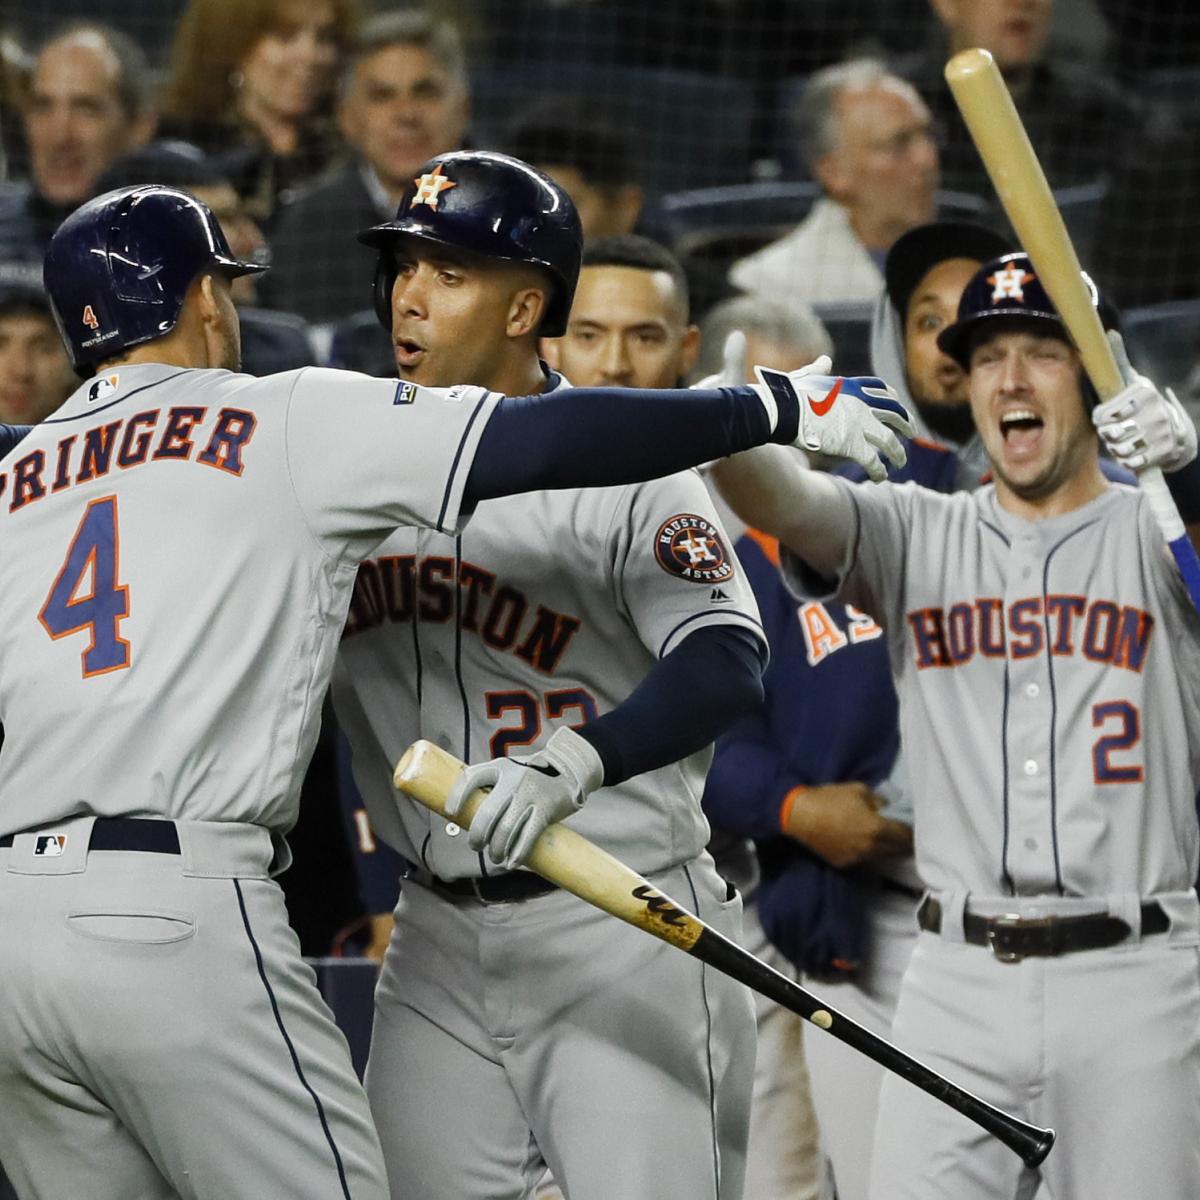 Yankees buck trend, comfortably beat good Astros team by 4-0 score -  Pinstripe Alley